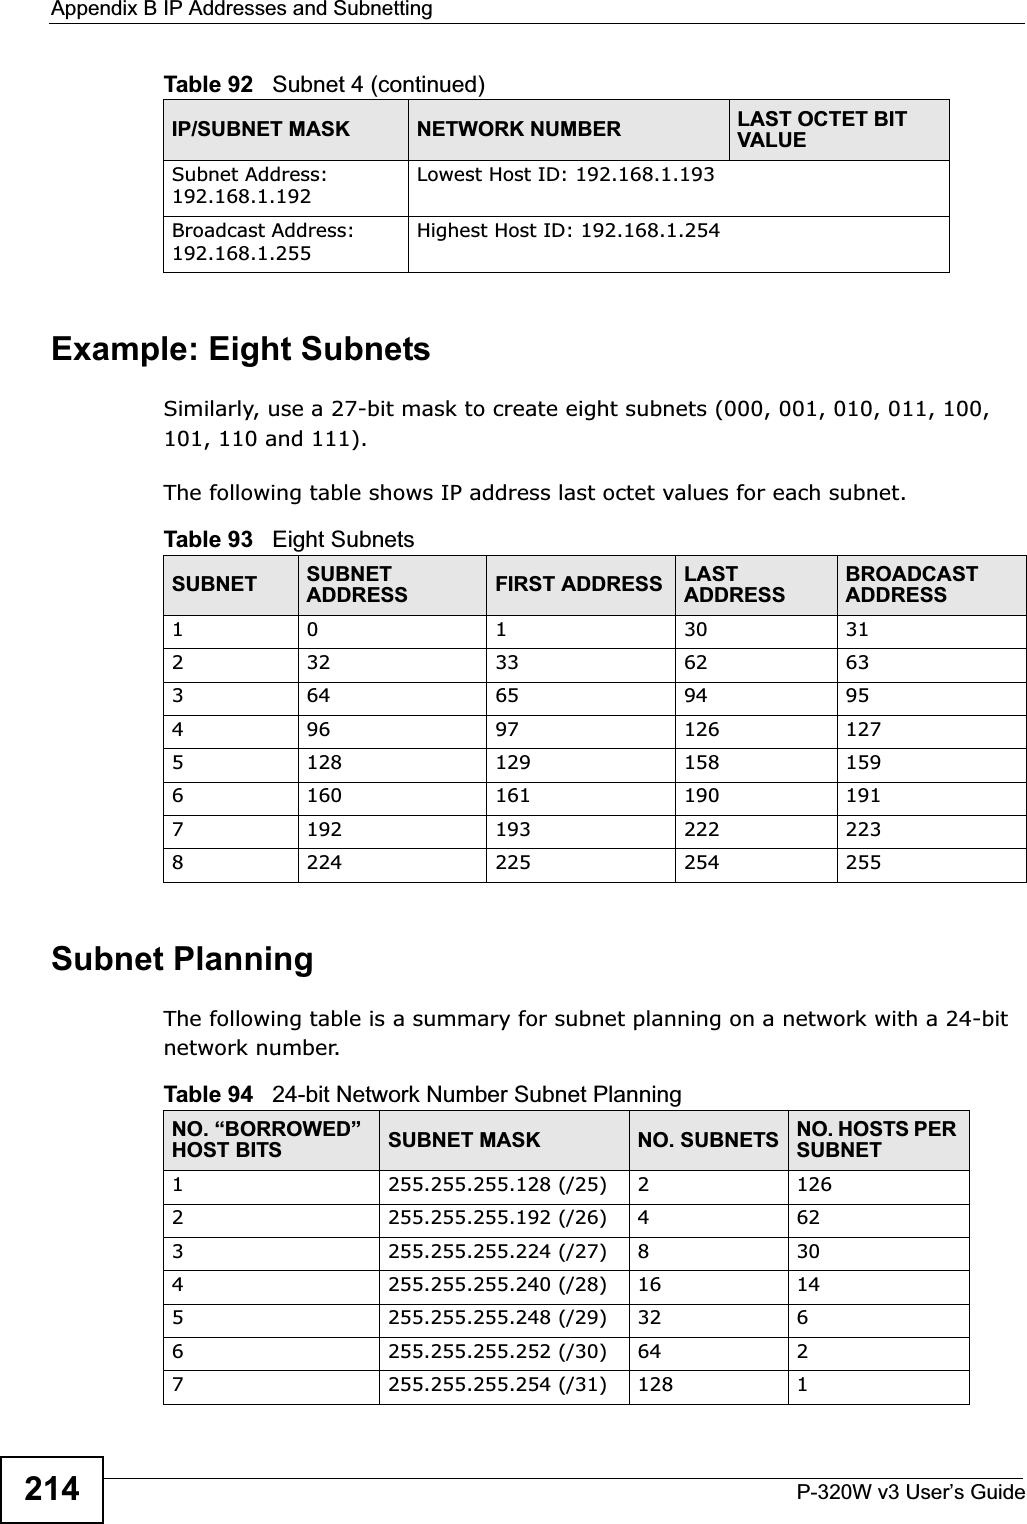 Appendix B IP Addresses and SubnettingP-320W v3 User’s Guide214Example: Eight SubnetsSimilarly, use a 27-bit mask to create eight subnets (000, 001, 010, 011, 100, 101, 110 and 111). The following table shows IP address last octet values for each subnet.Subnet PlanningThe following table is a summary for subnet planning on a network with a 24-bit network number.Subnet Address: 192.168.1.192Lowest Host ID: 192.168.1.193Broadcast Address: 192.168.1.255Highest Host ID: 192.168.1.254Table 92   Subnet 4 (continued)IP/SUBNET MASK NETWORK NUMBER LAST OCTET BIT VALUETable 93   Eight SubnetsSUBNET SUBNET ADDRESS FIRST ADDRESS LAST ADDRESSBROADCAST ADDRESS1 0 1 30 31232 33 62 63364 65 94 95496 97 126 1275128 129 158 1596160 161 190 1917192 193 222 2238224 225 254 255Table 94   24-bit Network Number Subnet PlanningNO. “BORROWED” HOST BITS SUBNET MASK NO. SUBNETS NO. HOSTS PER SUBNET1255.255.255.128 (/25) 21262255.255.255.192 (/26) 4623255.255.255.224 (/27) 8304255.255.255.240 (/28) 16 145255.255.255.248 (/29) 32 66255.255.255.252 (/30) 64 27255.255.255.254 (/31) 128 1